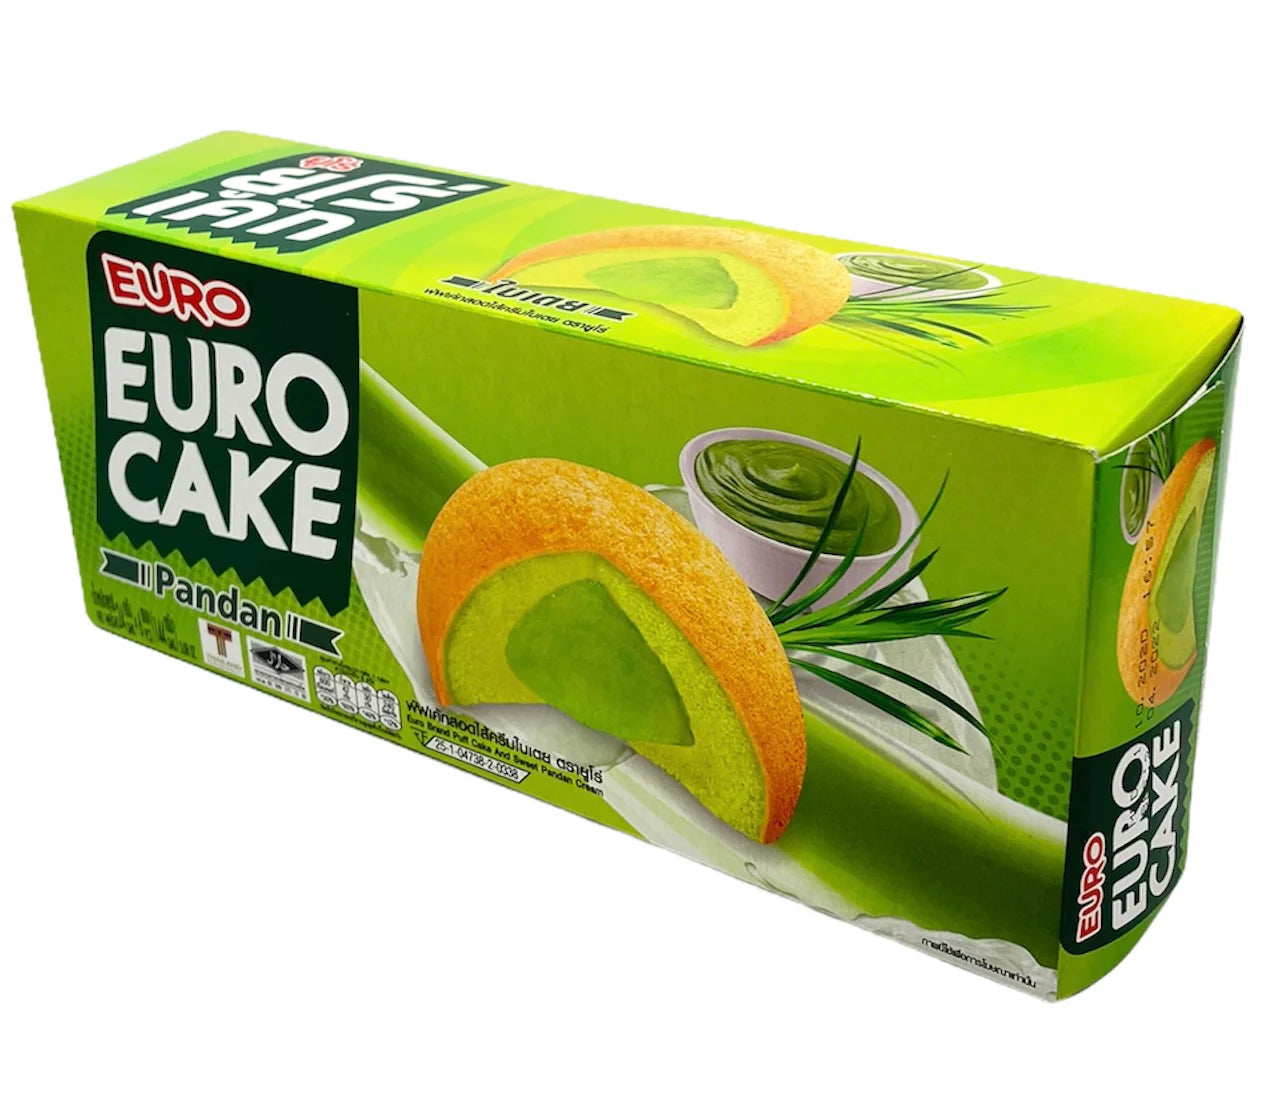 Euro Cake Assorted Flavors 12 Individually Wrapped Cakes Per Box